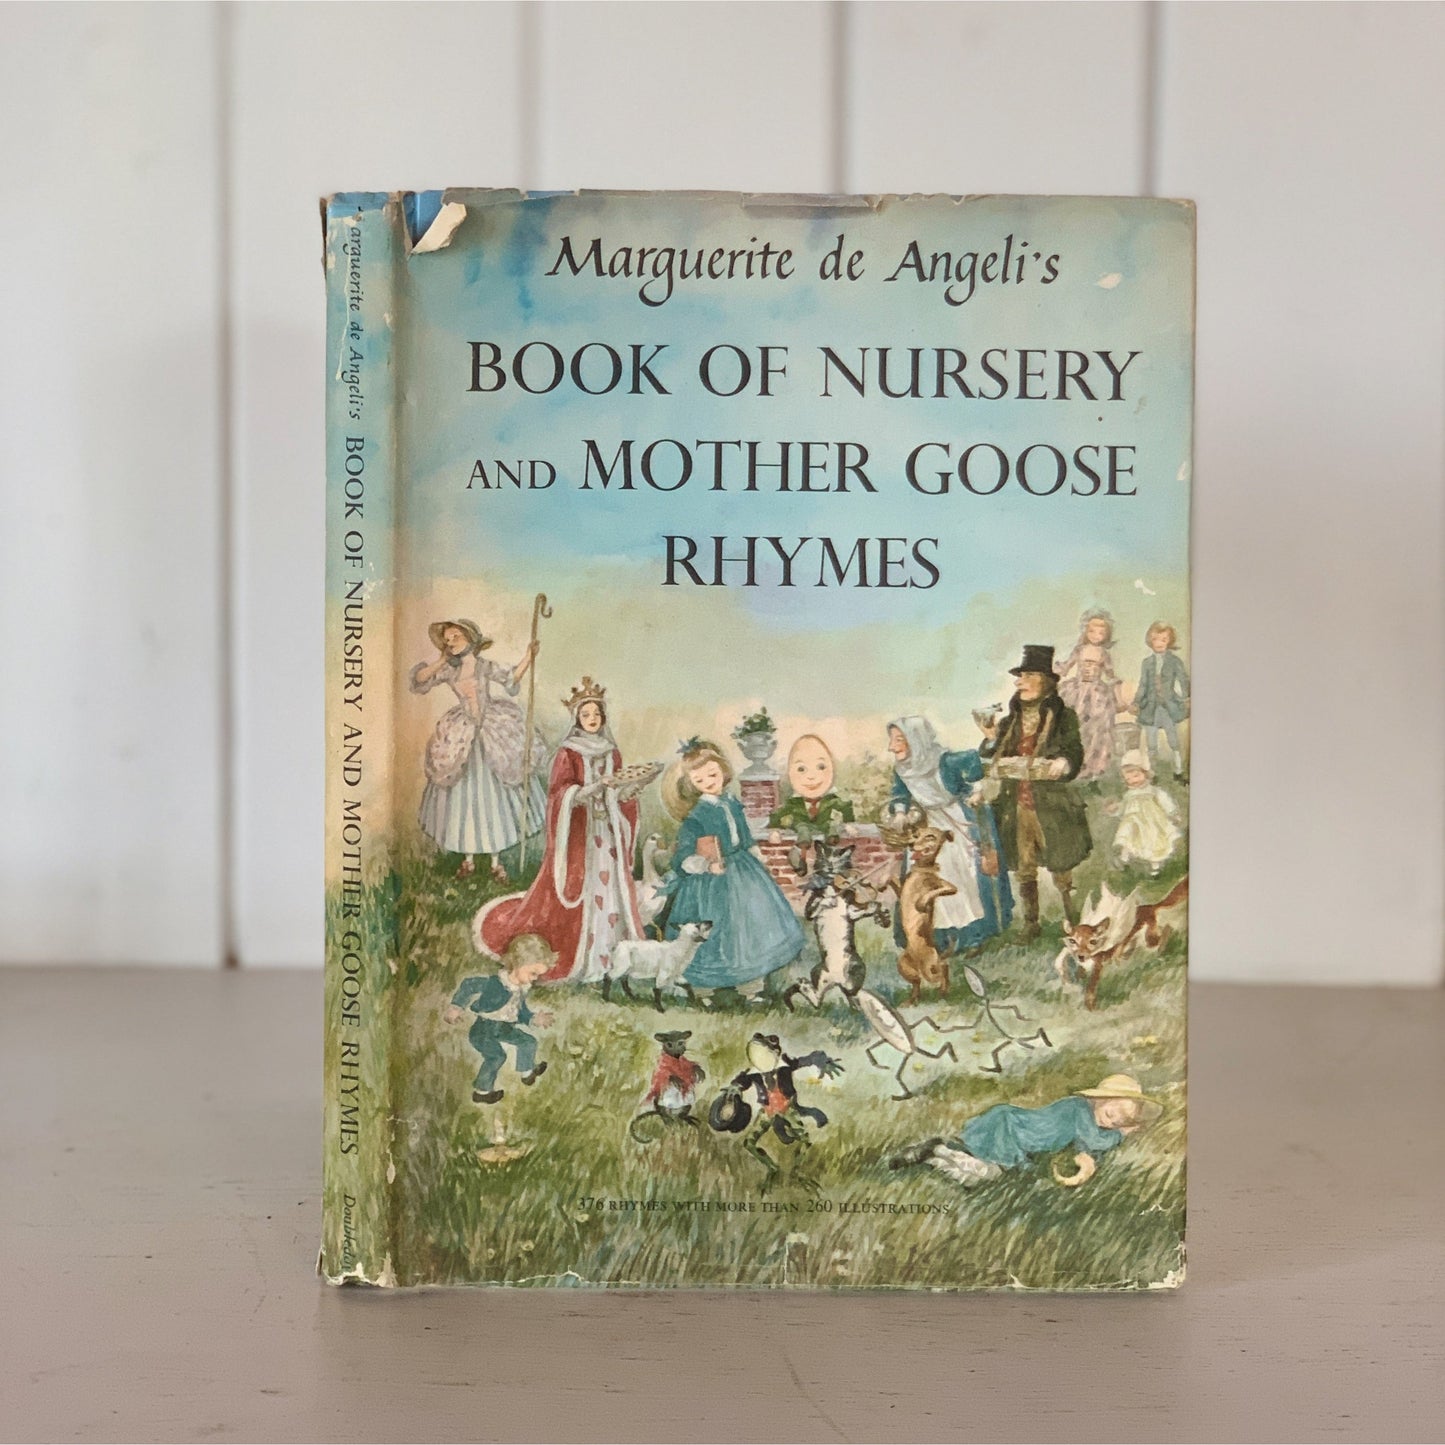 Marguerite de Angeli's Book of Nursery and Mother Goose Rhymes, 1954 Hardcover w/DJ